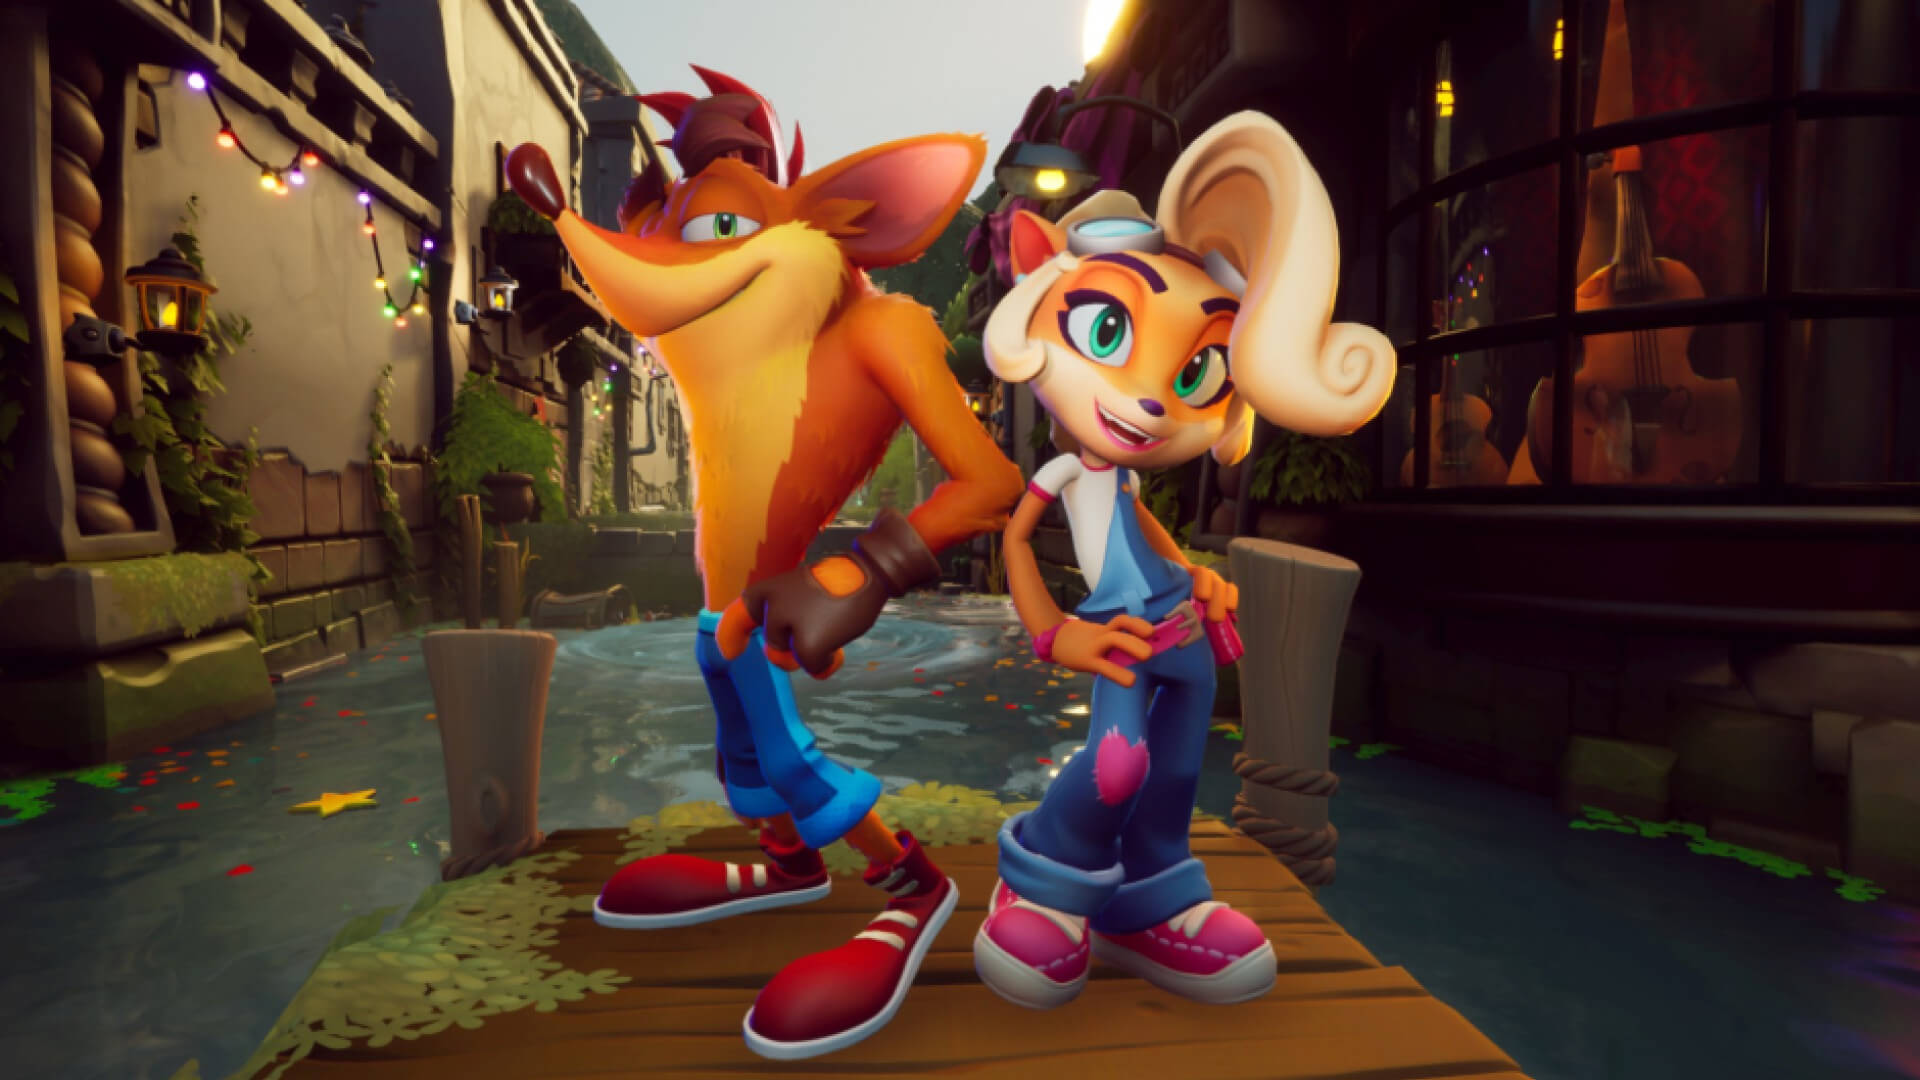 Crash Bandicoot 4: It's About Time Lands on New Consoles